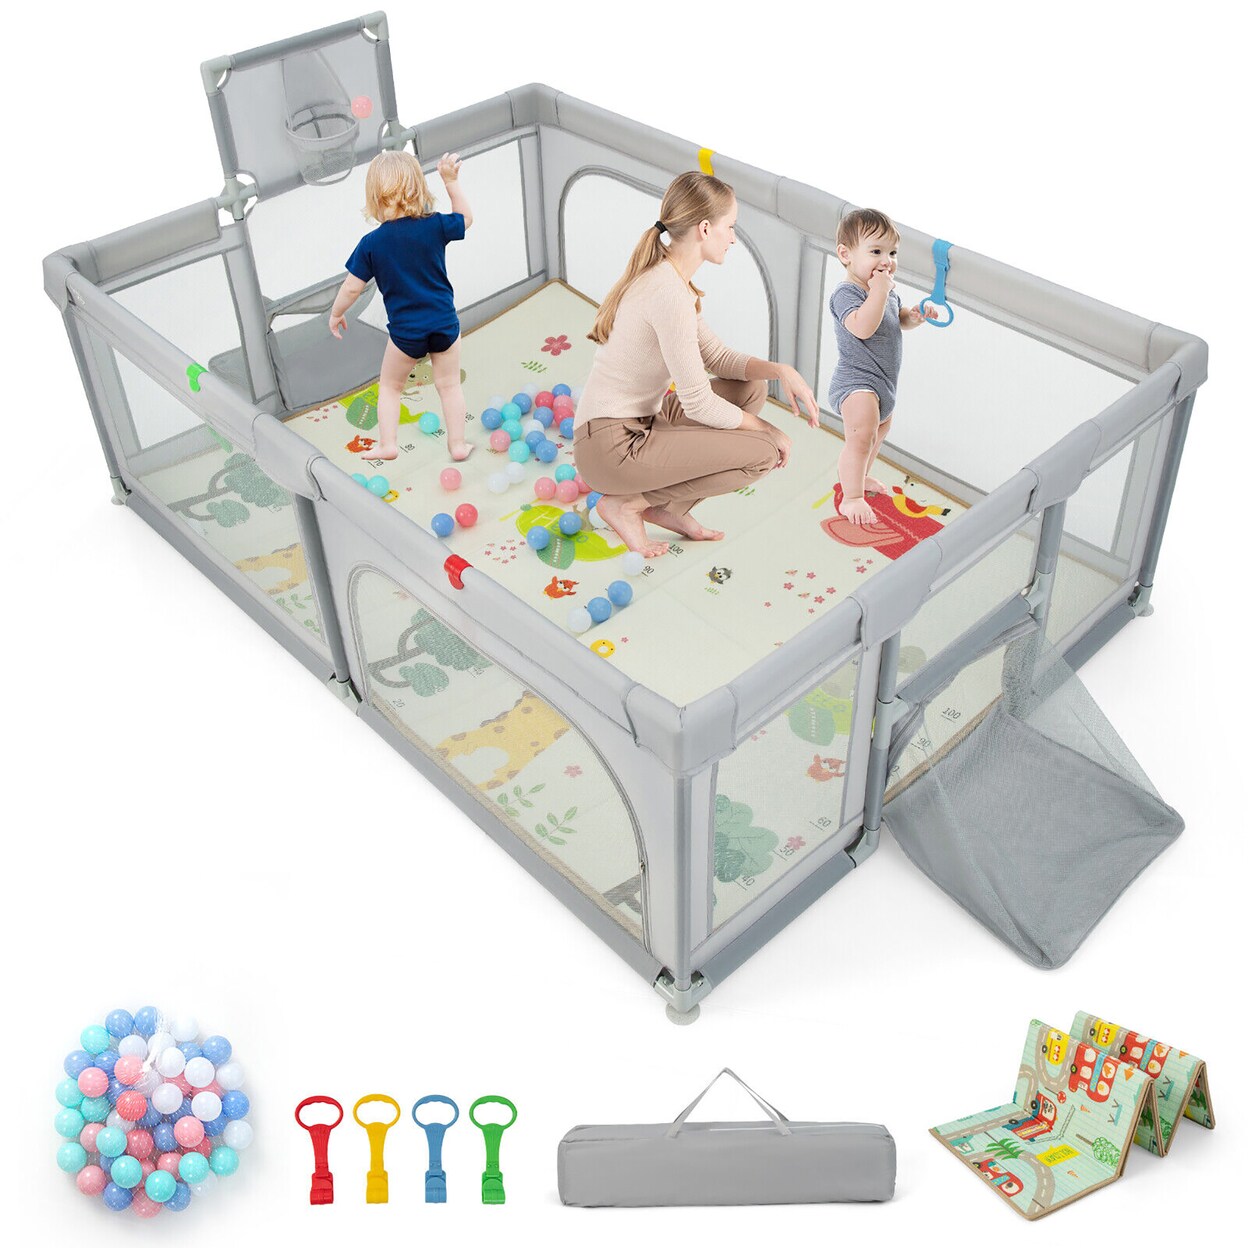 Gymax Baby Playpen Large Safe Play Yard Fun Activity Center with Mat and Soccer Nets